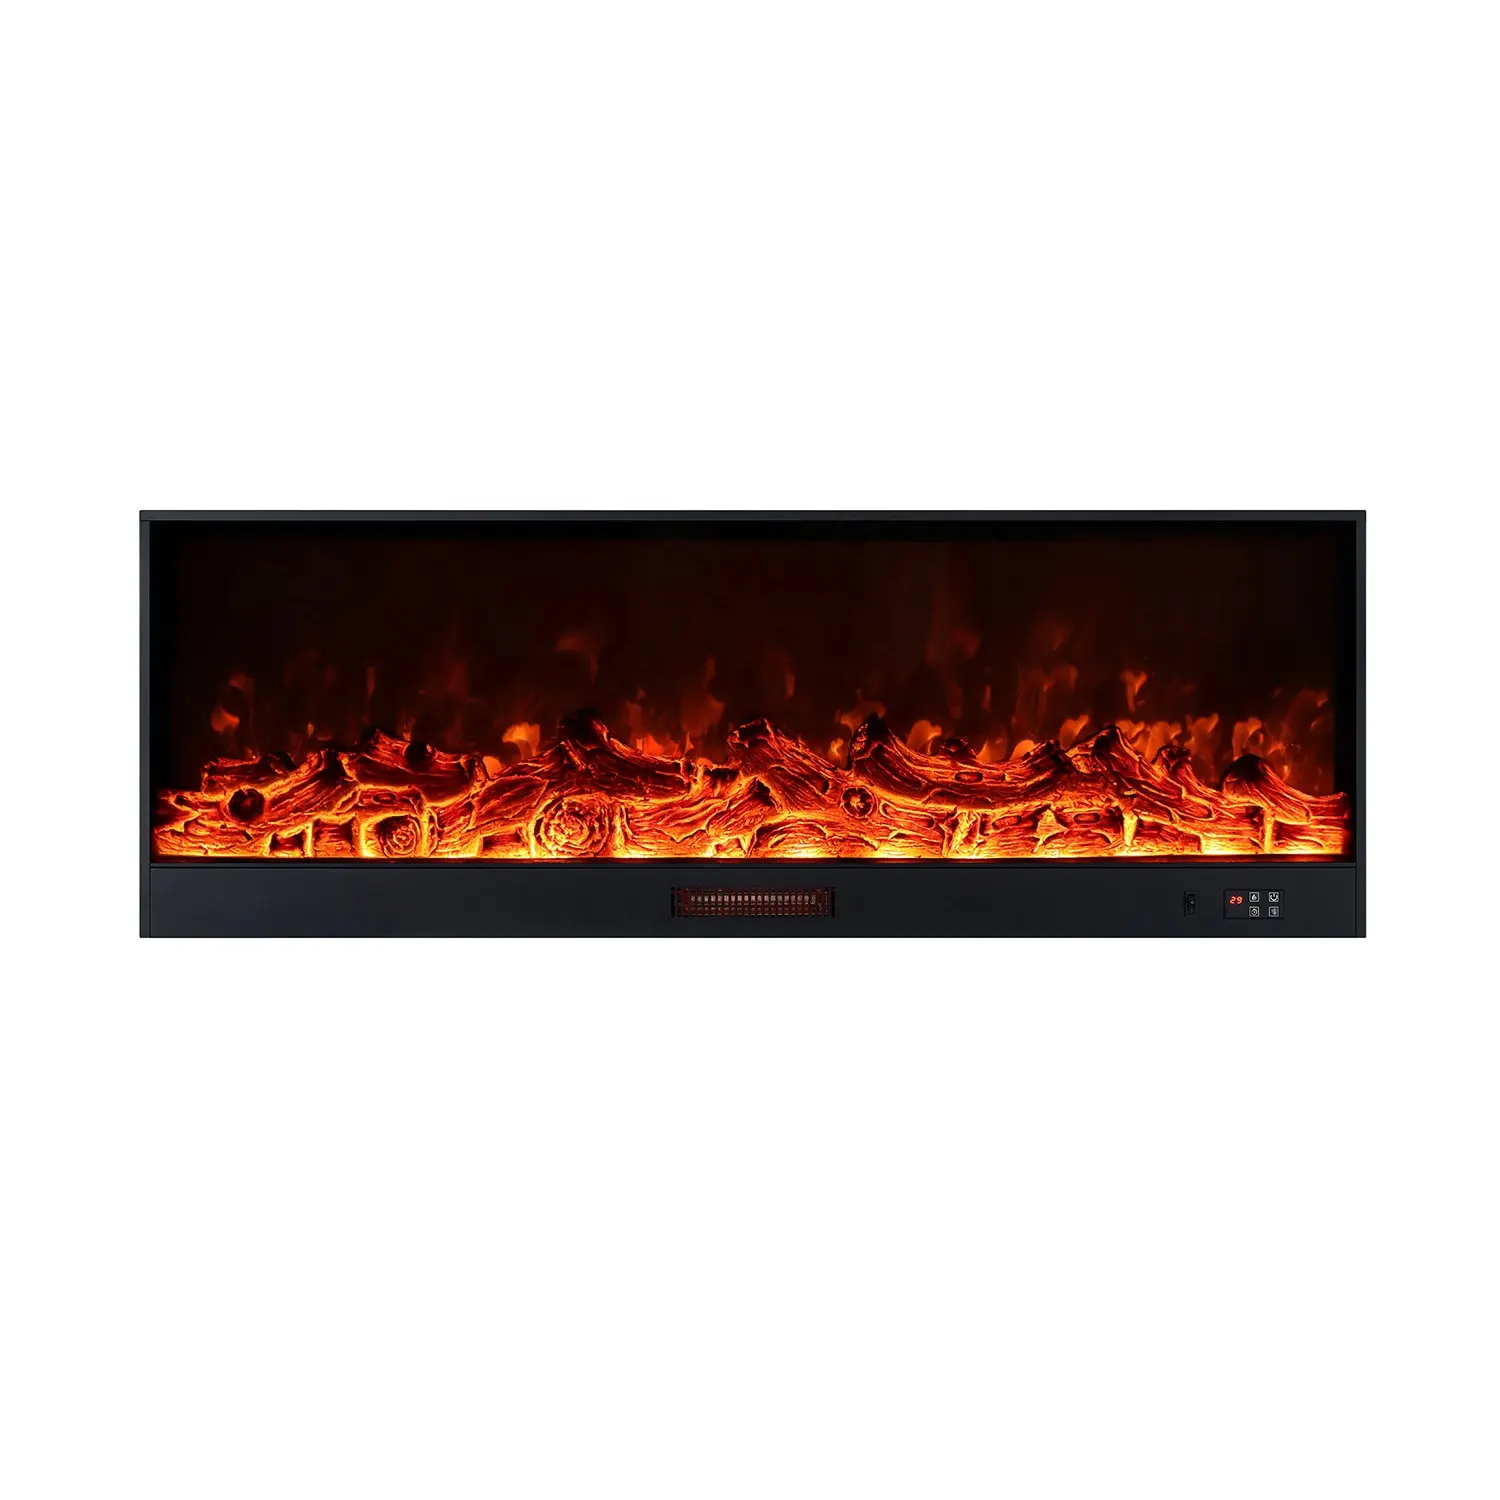 Modern Indoor Decorative Led Electric Fireplace Insert Heater Living Room Wall Mounted Electric Fireplaces